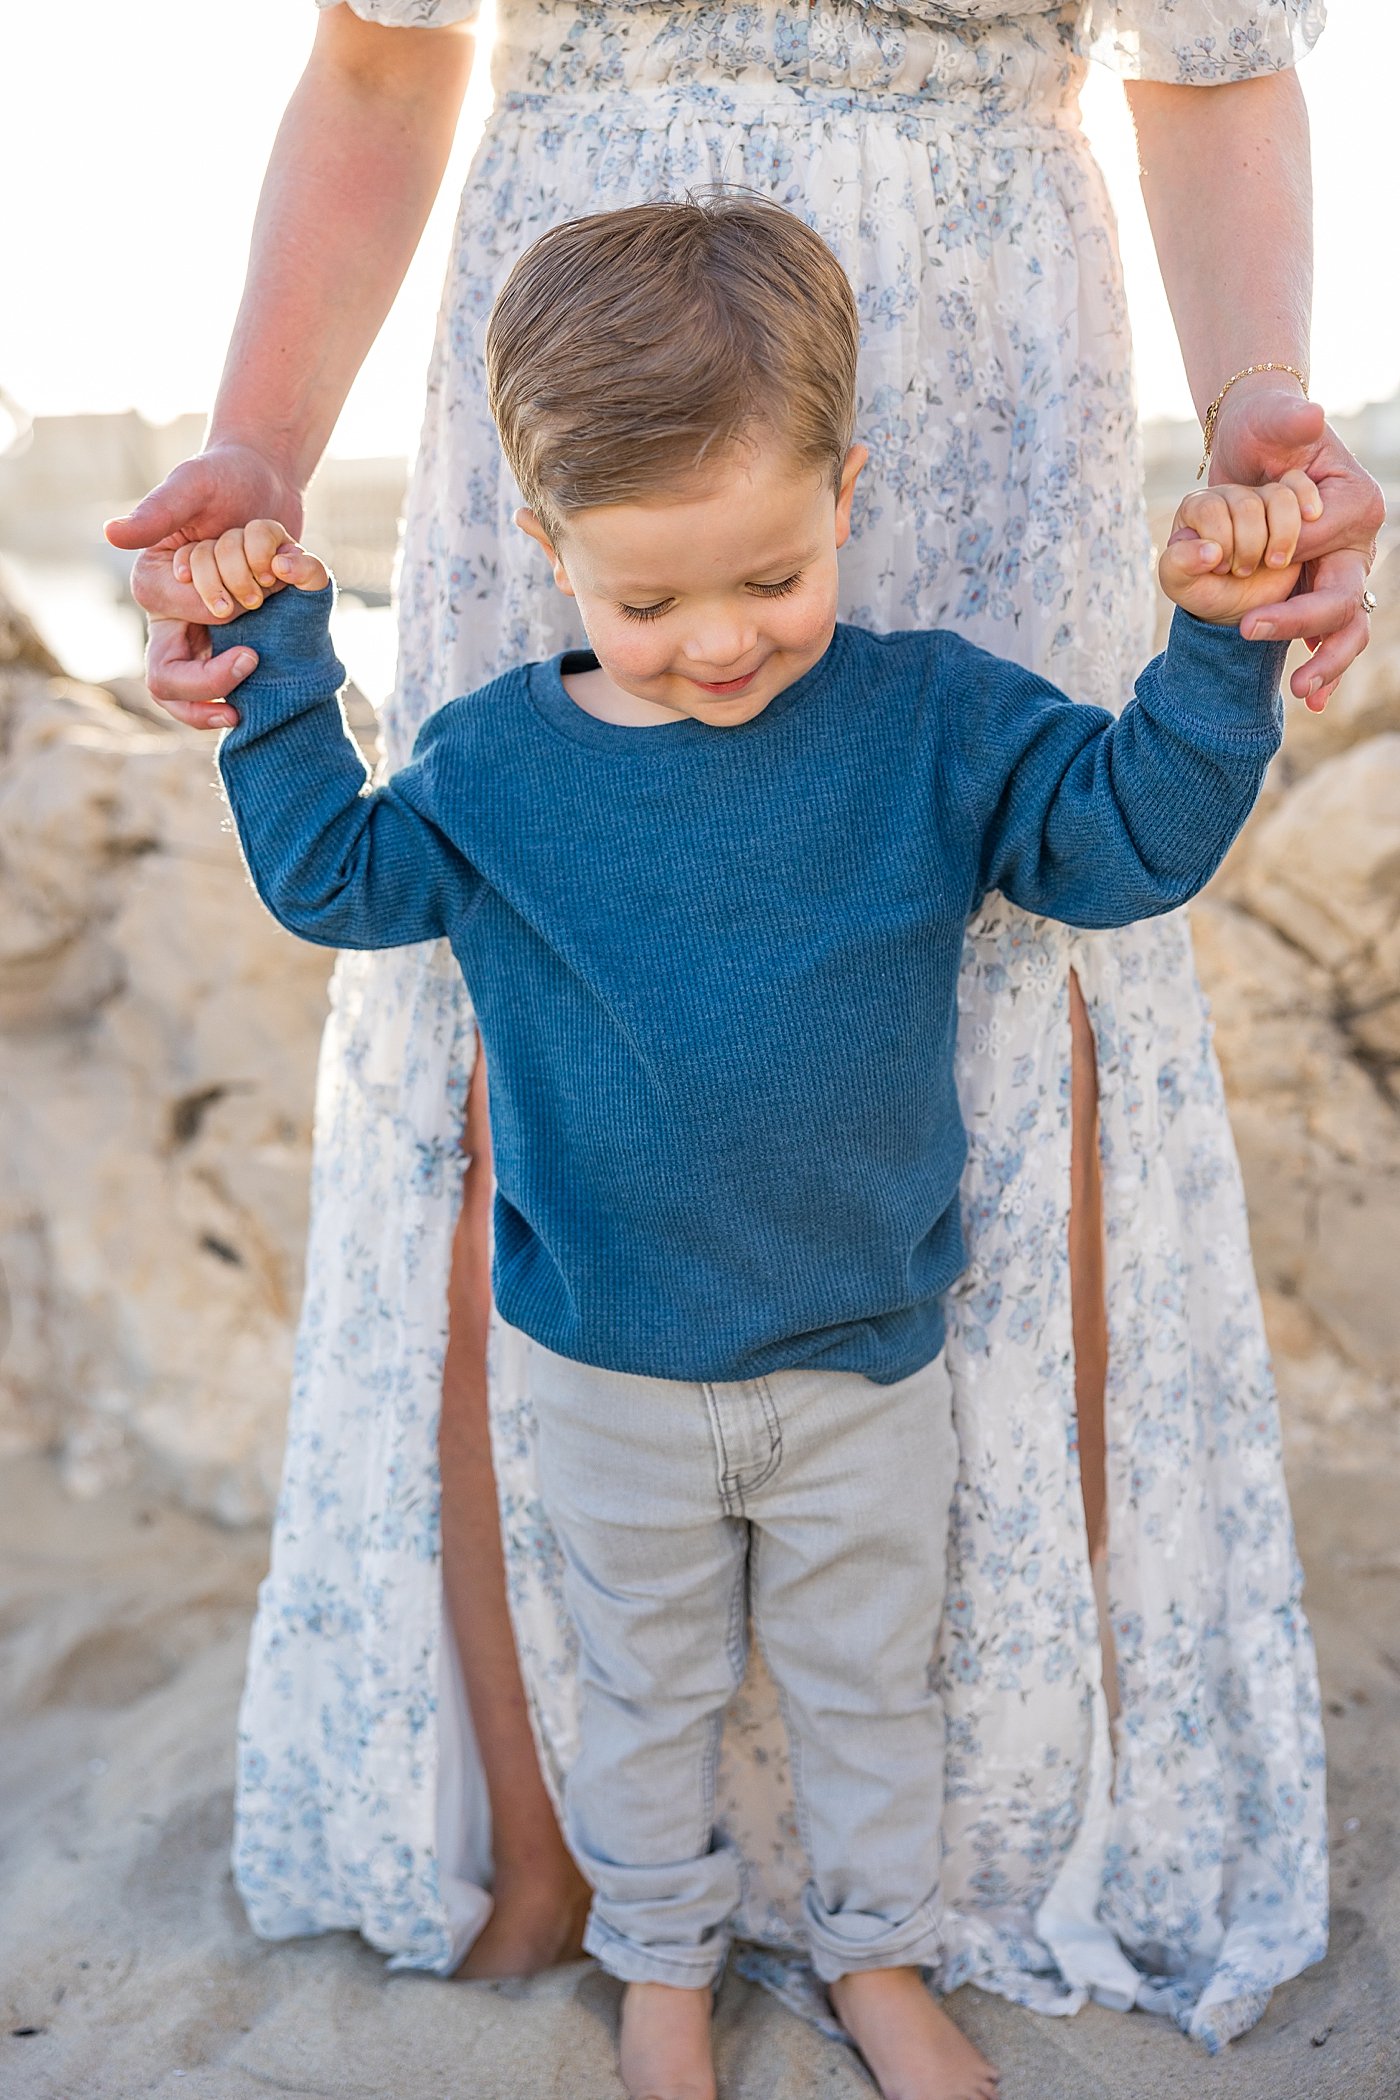 Beach Family Portraits with Ambre Williams Photography